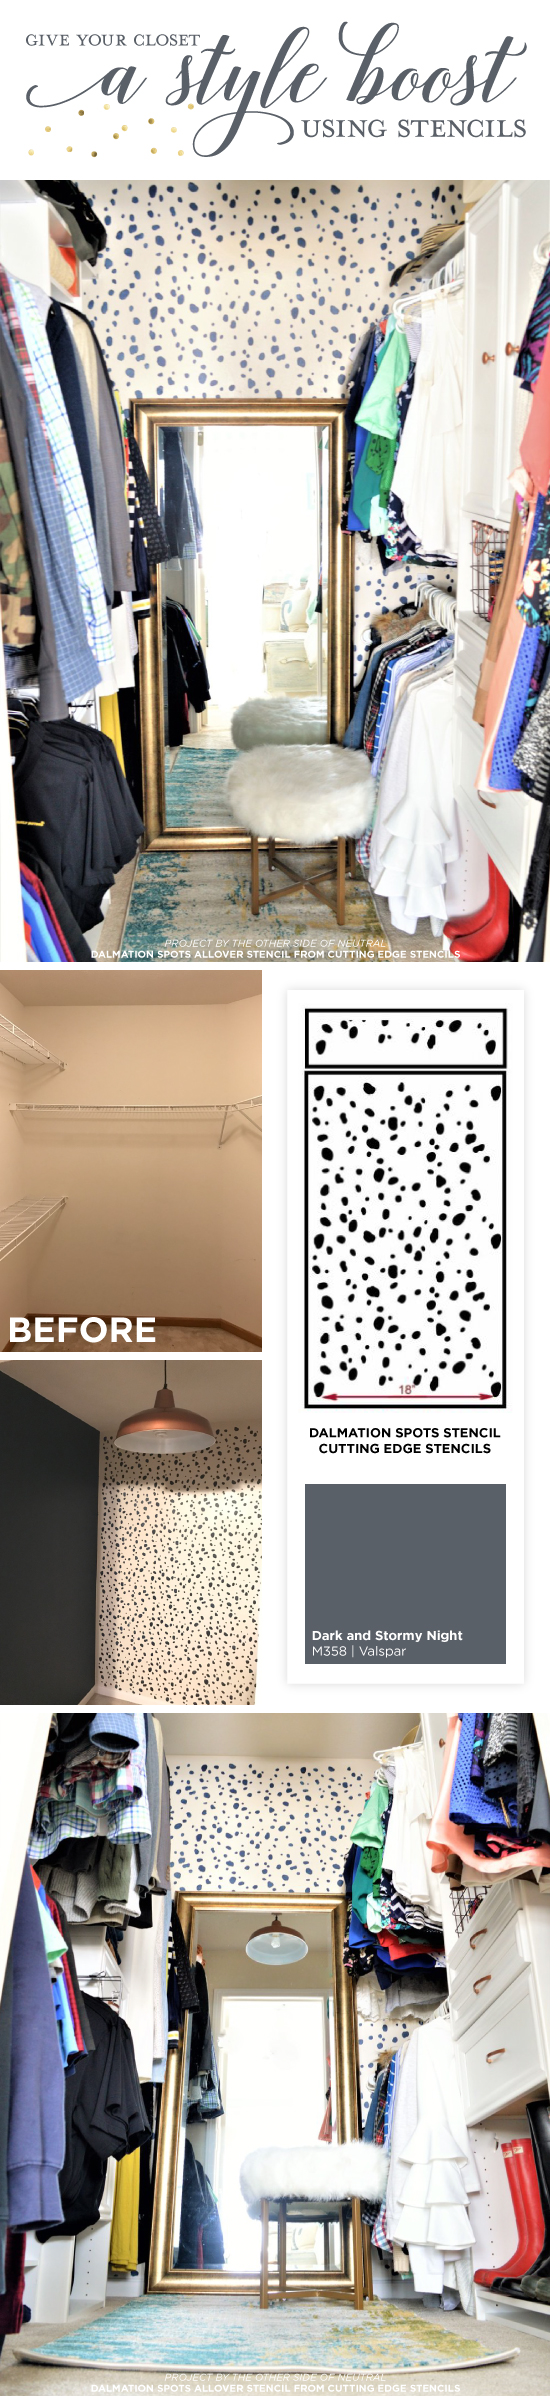 Cutting Edge Stencils shares a DIY stenciled master bedroom closet accent wall using the Dalmatian Spots Allover Stencil. http://www.cuttingedgestencils.com/dalmatian-spots-stencil-dots-wallpaper-pattern.html